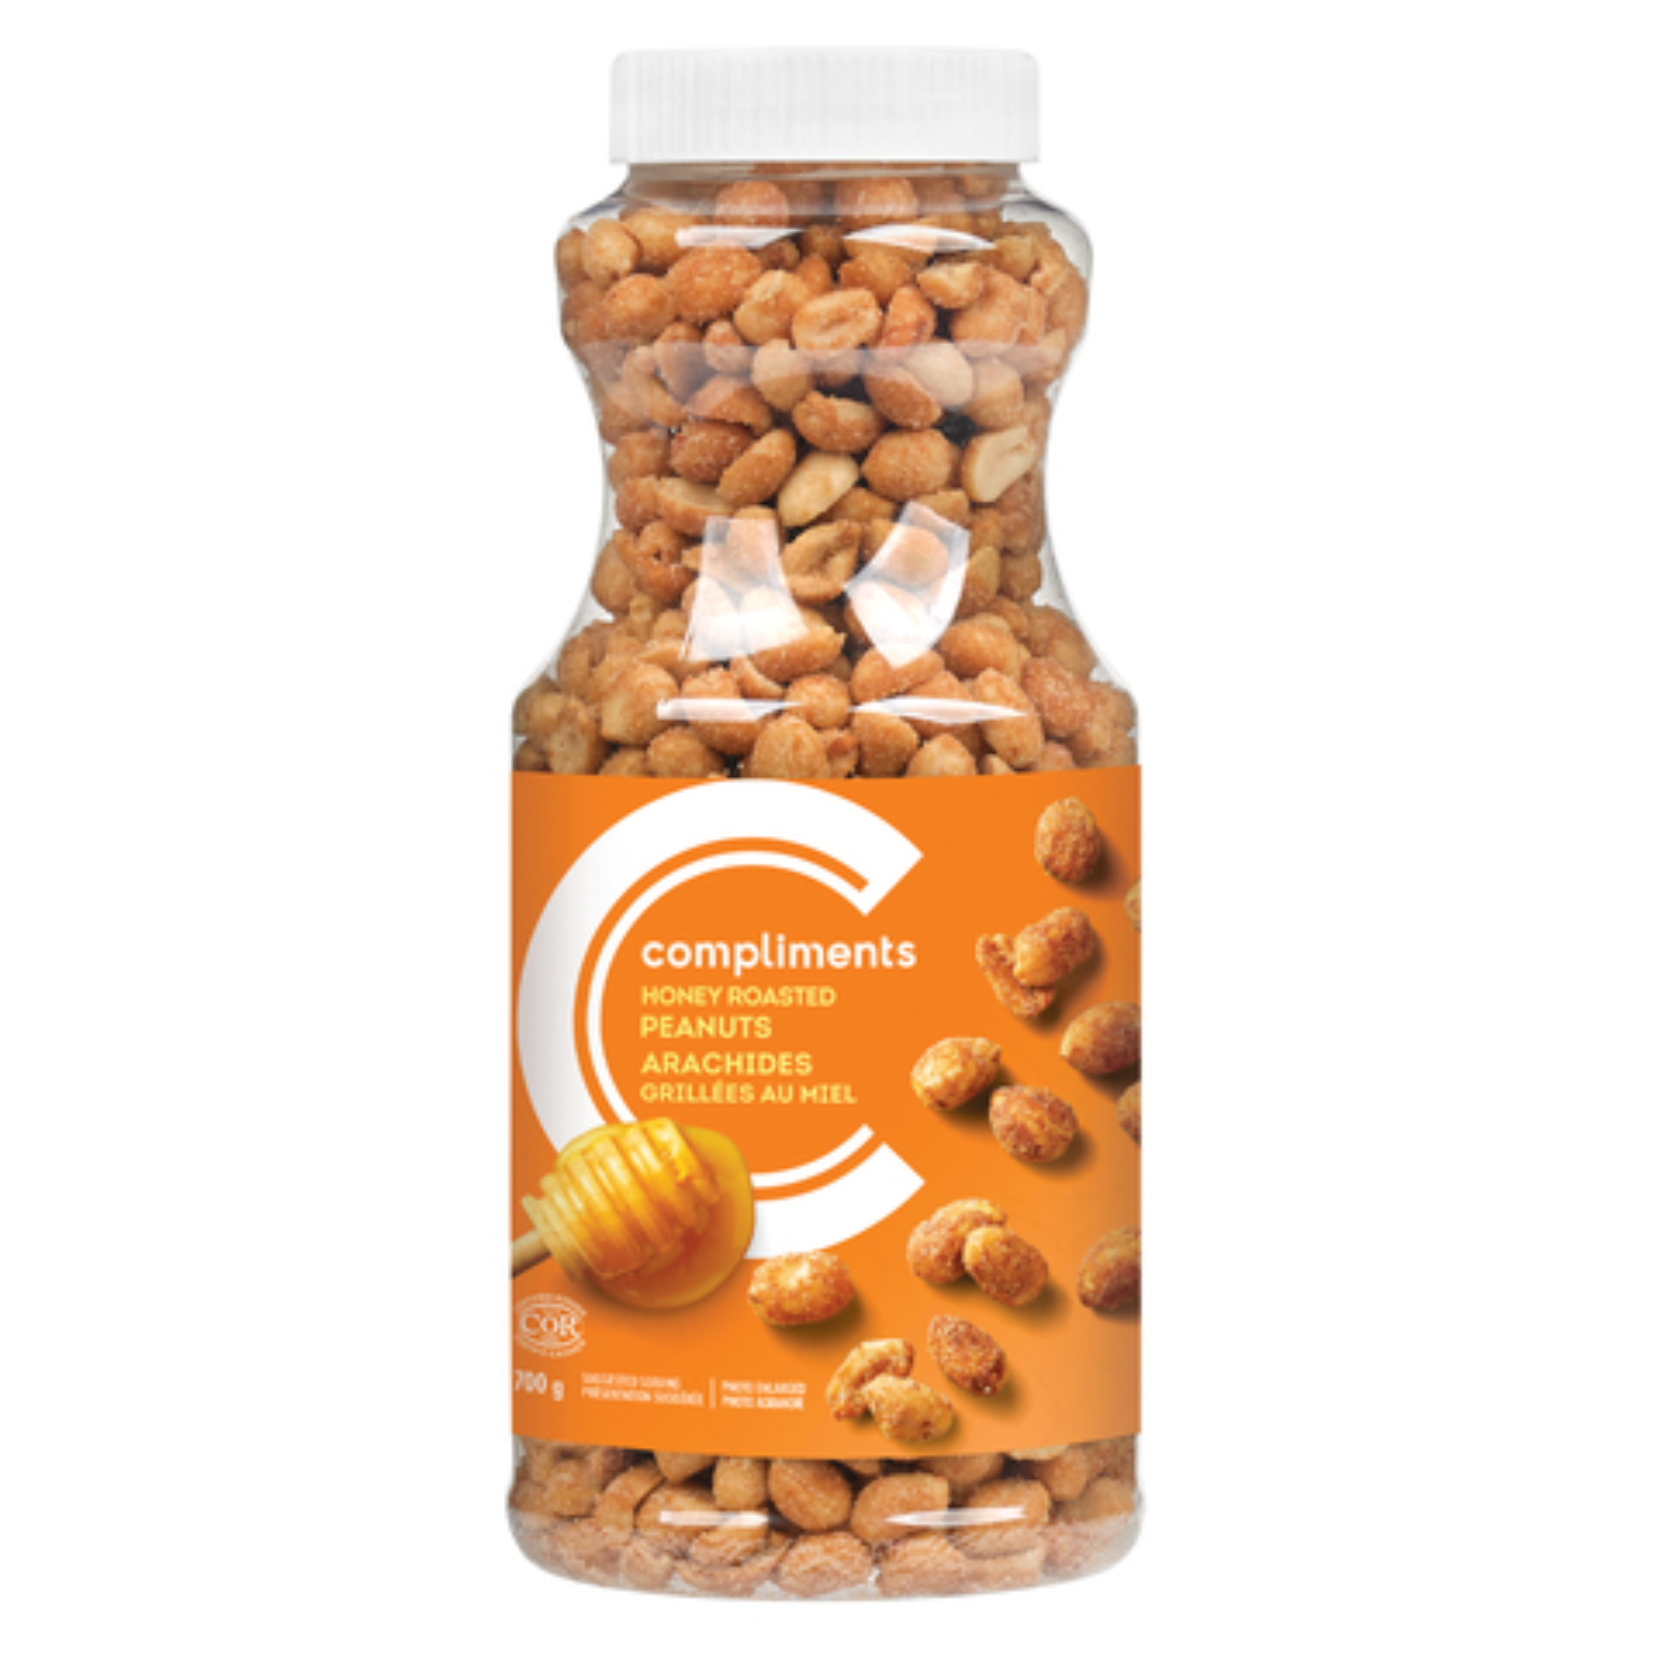 Compliments Honey Roasted Peanuts 700g